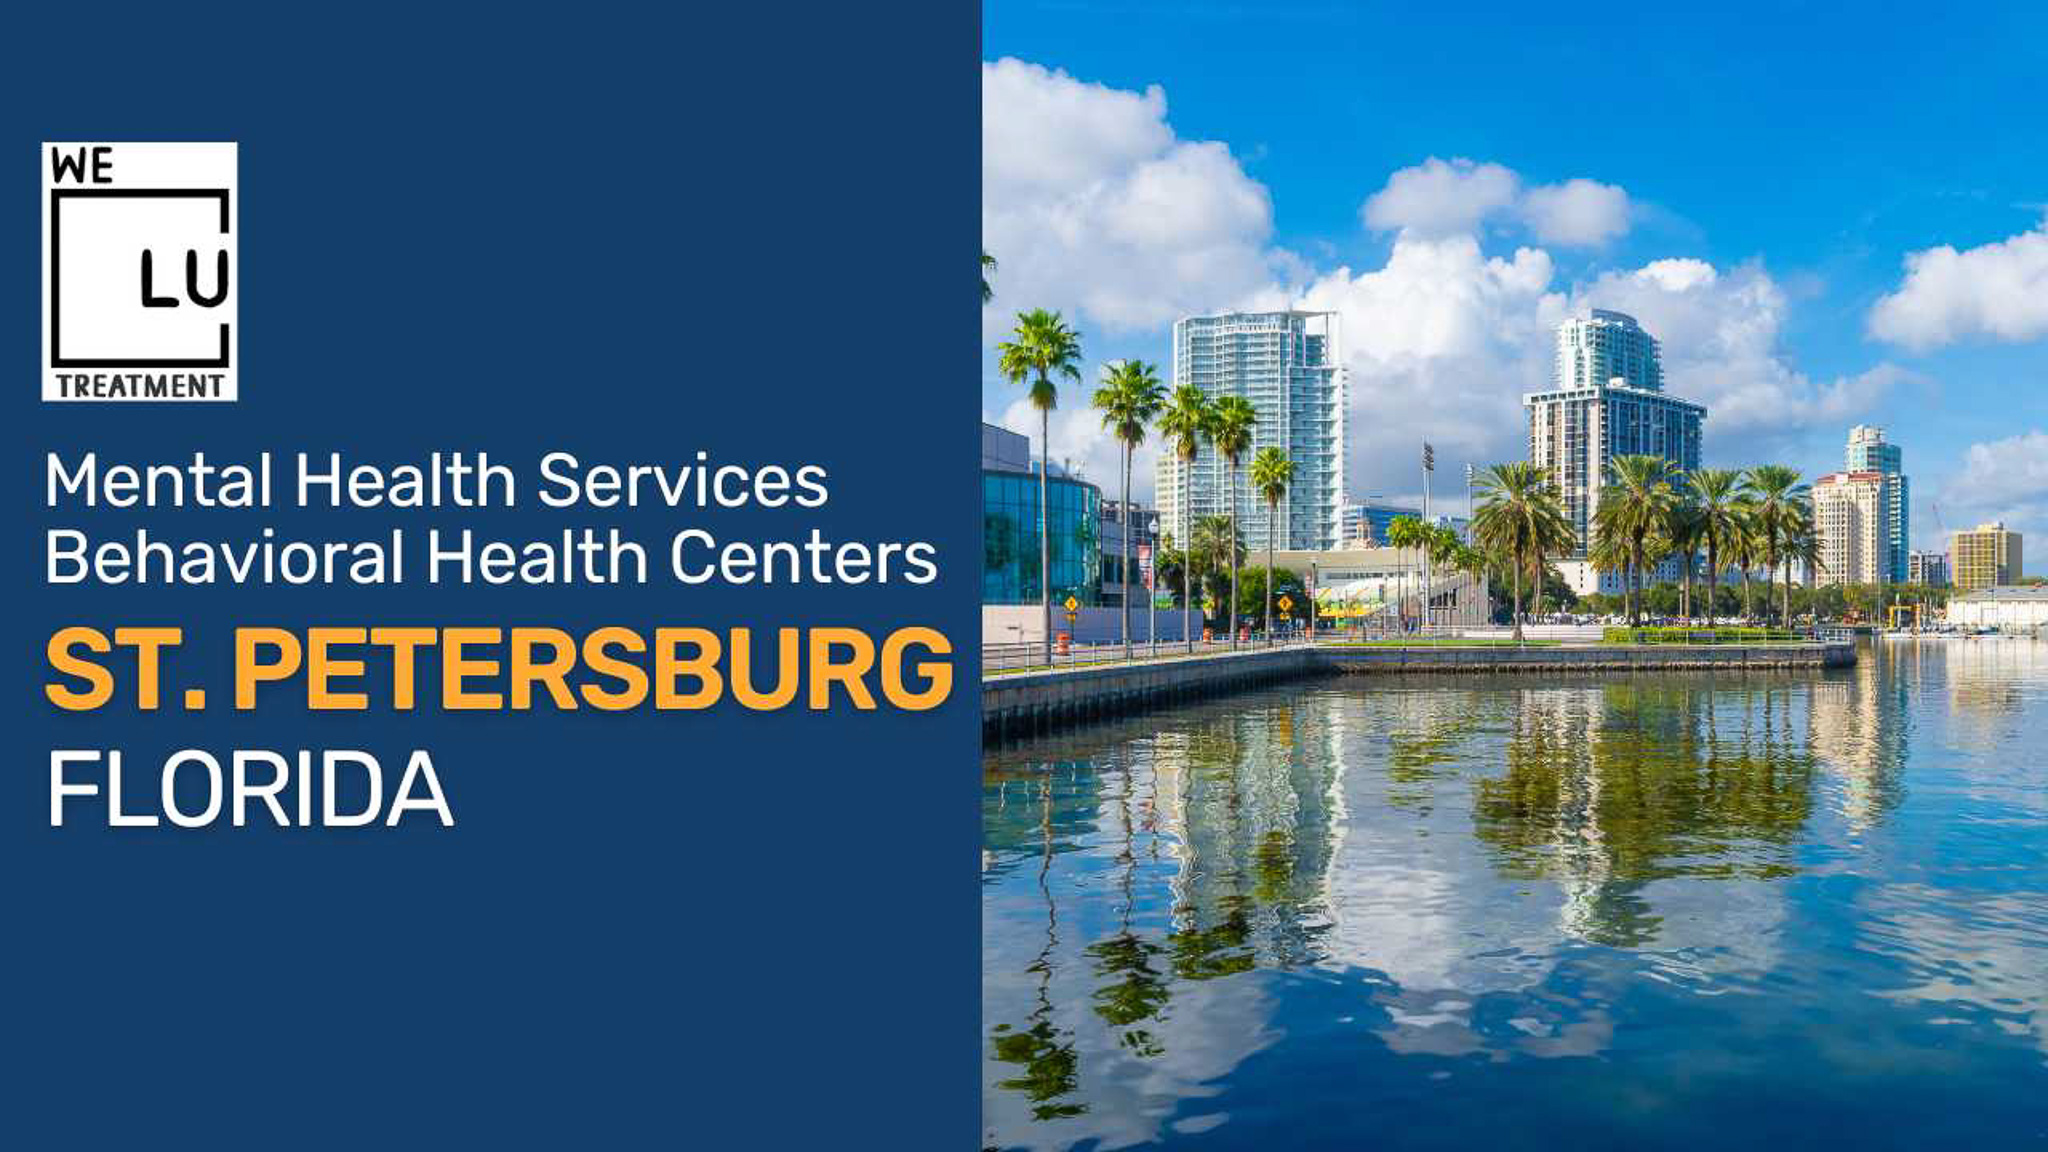 St. Petersburg FL (MH) We Level Up treatment center for drug and alcohol rehab detox and mental health services - Image 1